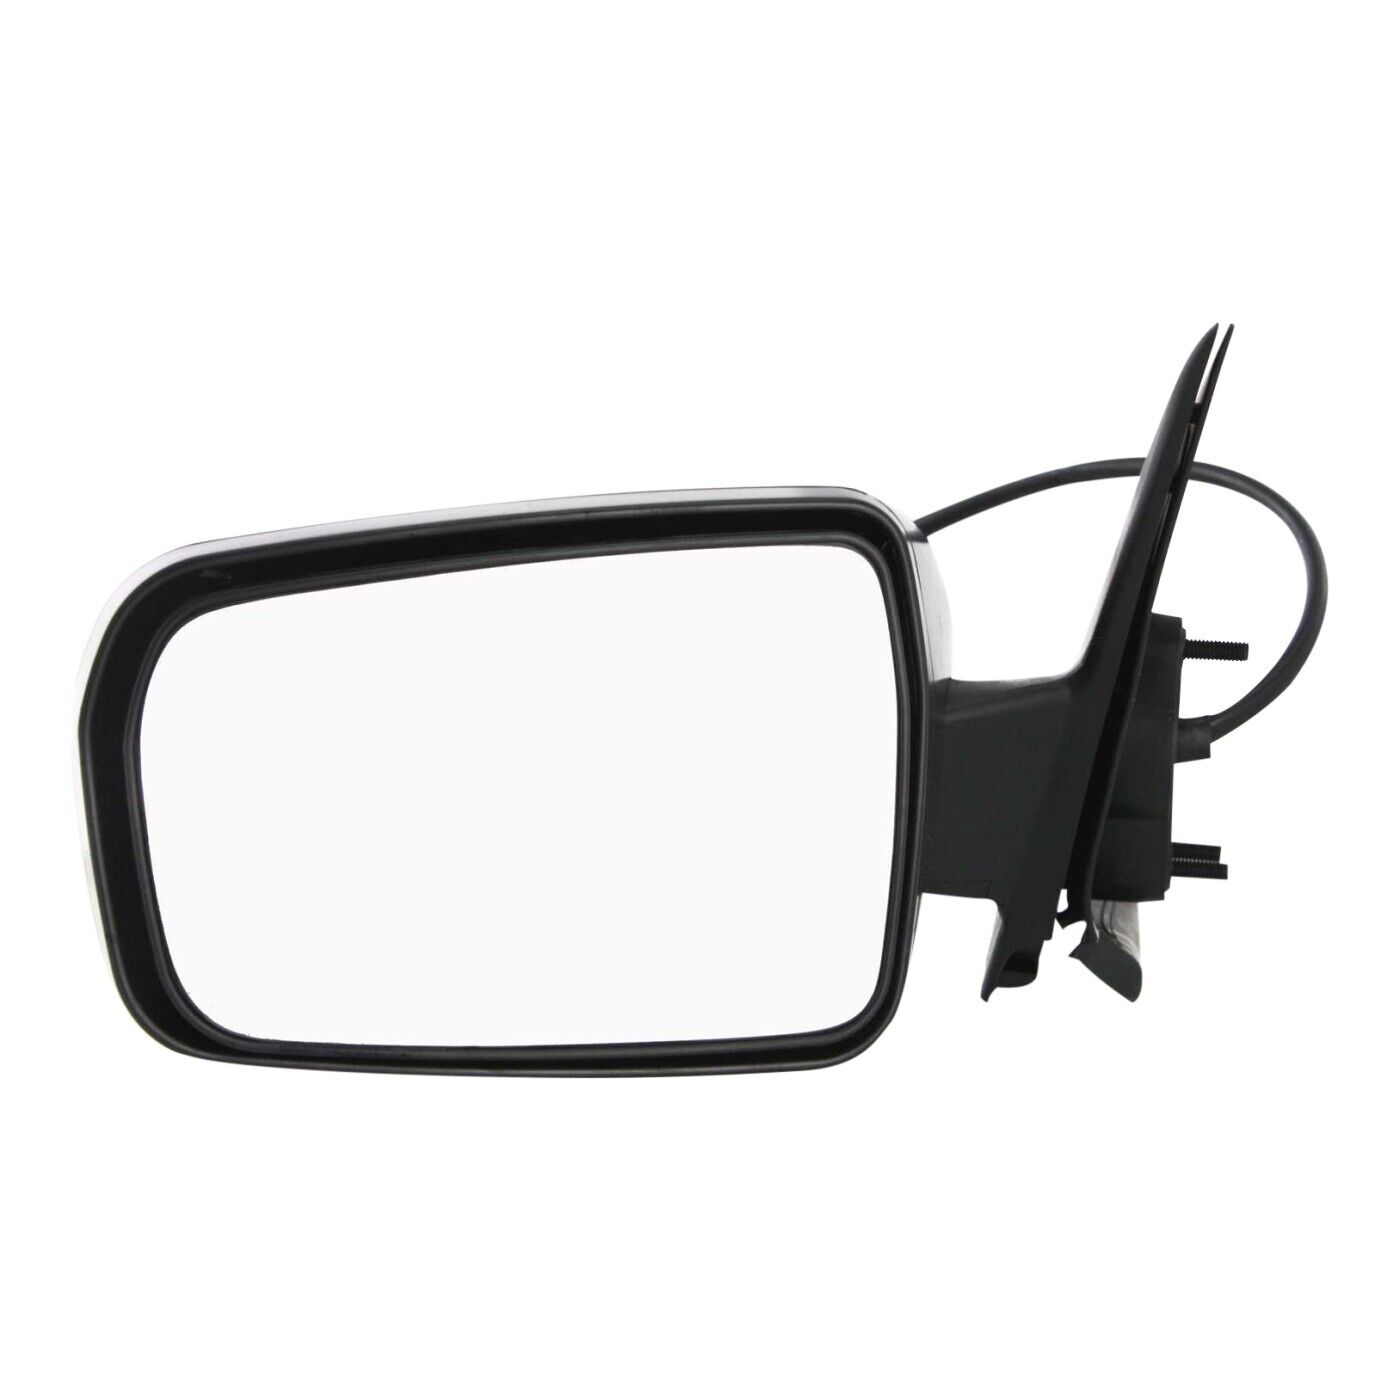 Power Mirror For 2004-2012 Mitsubishi Galant Driver Side Textured Black